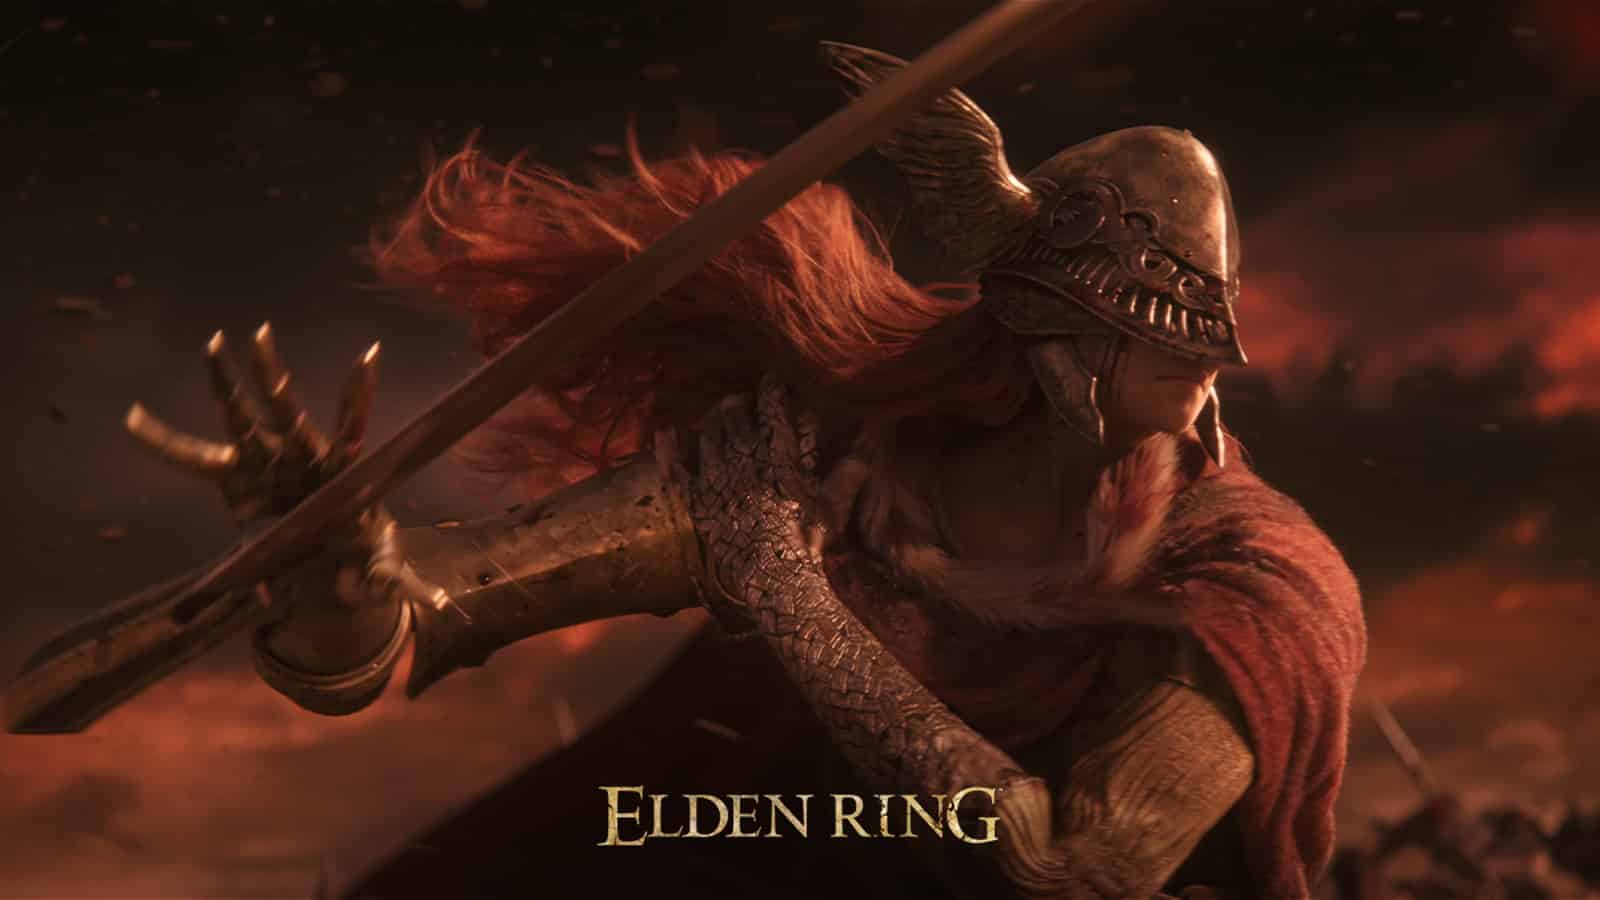 Elden Ring's Let Me Solo Her player receives special, real-life